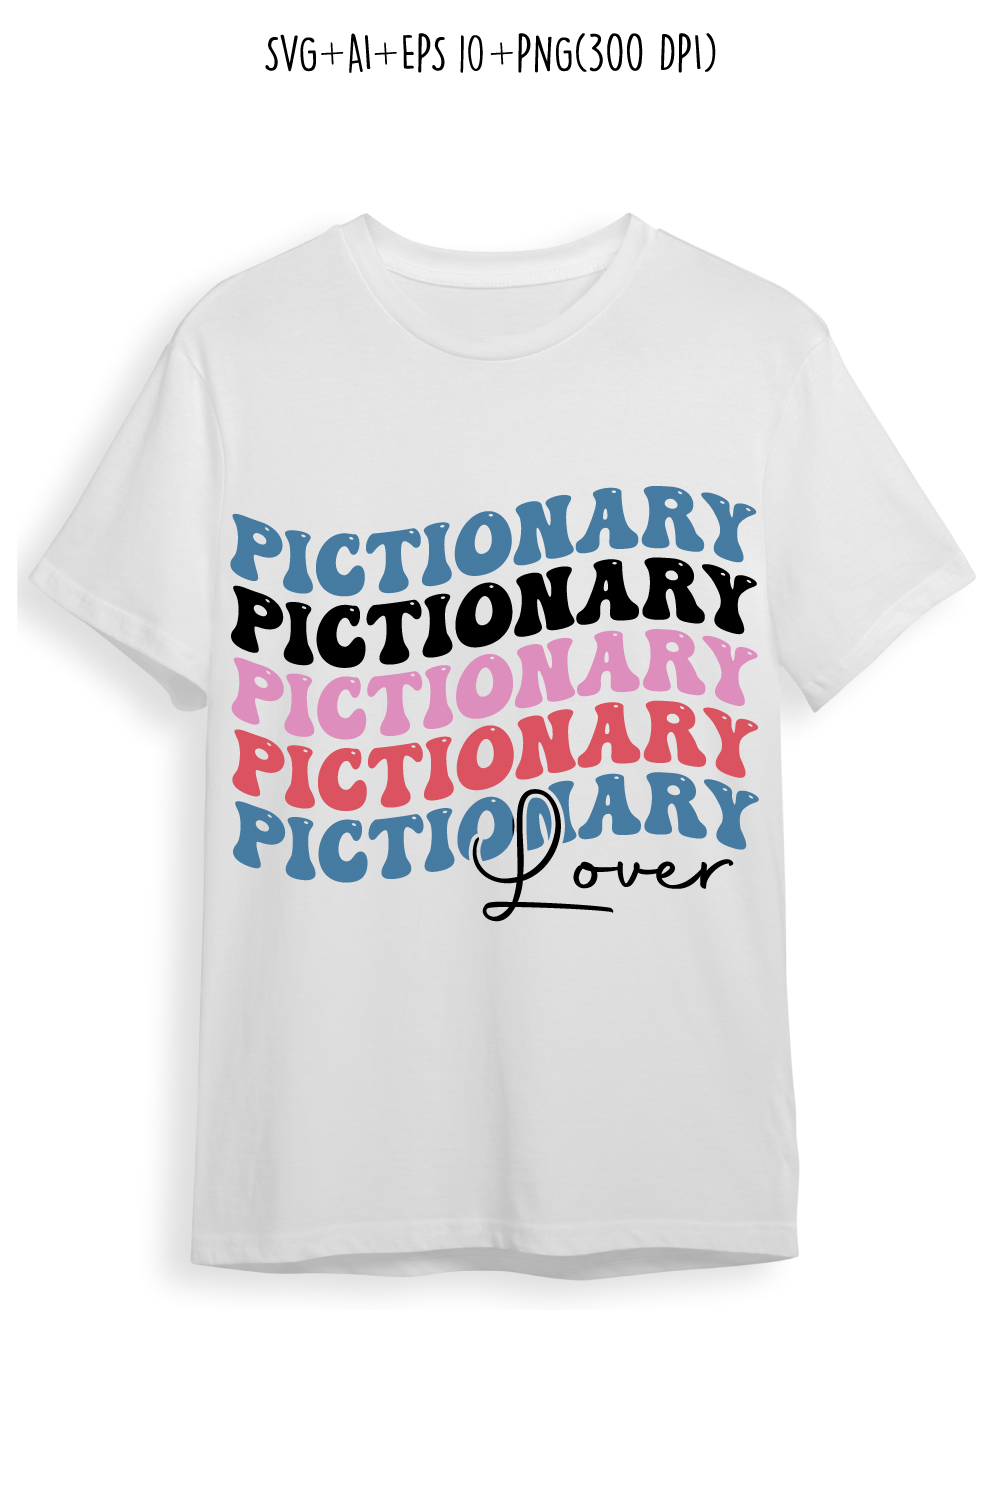 Pictionary lover indoor game retro typography design for t-shirts, cards, frame artwork, phone cases, bags, mugs, stickers, tumblers, print, etc pinterest preview image.